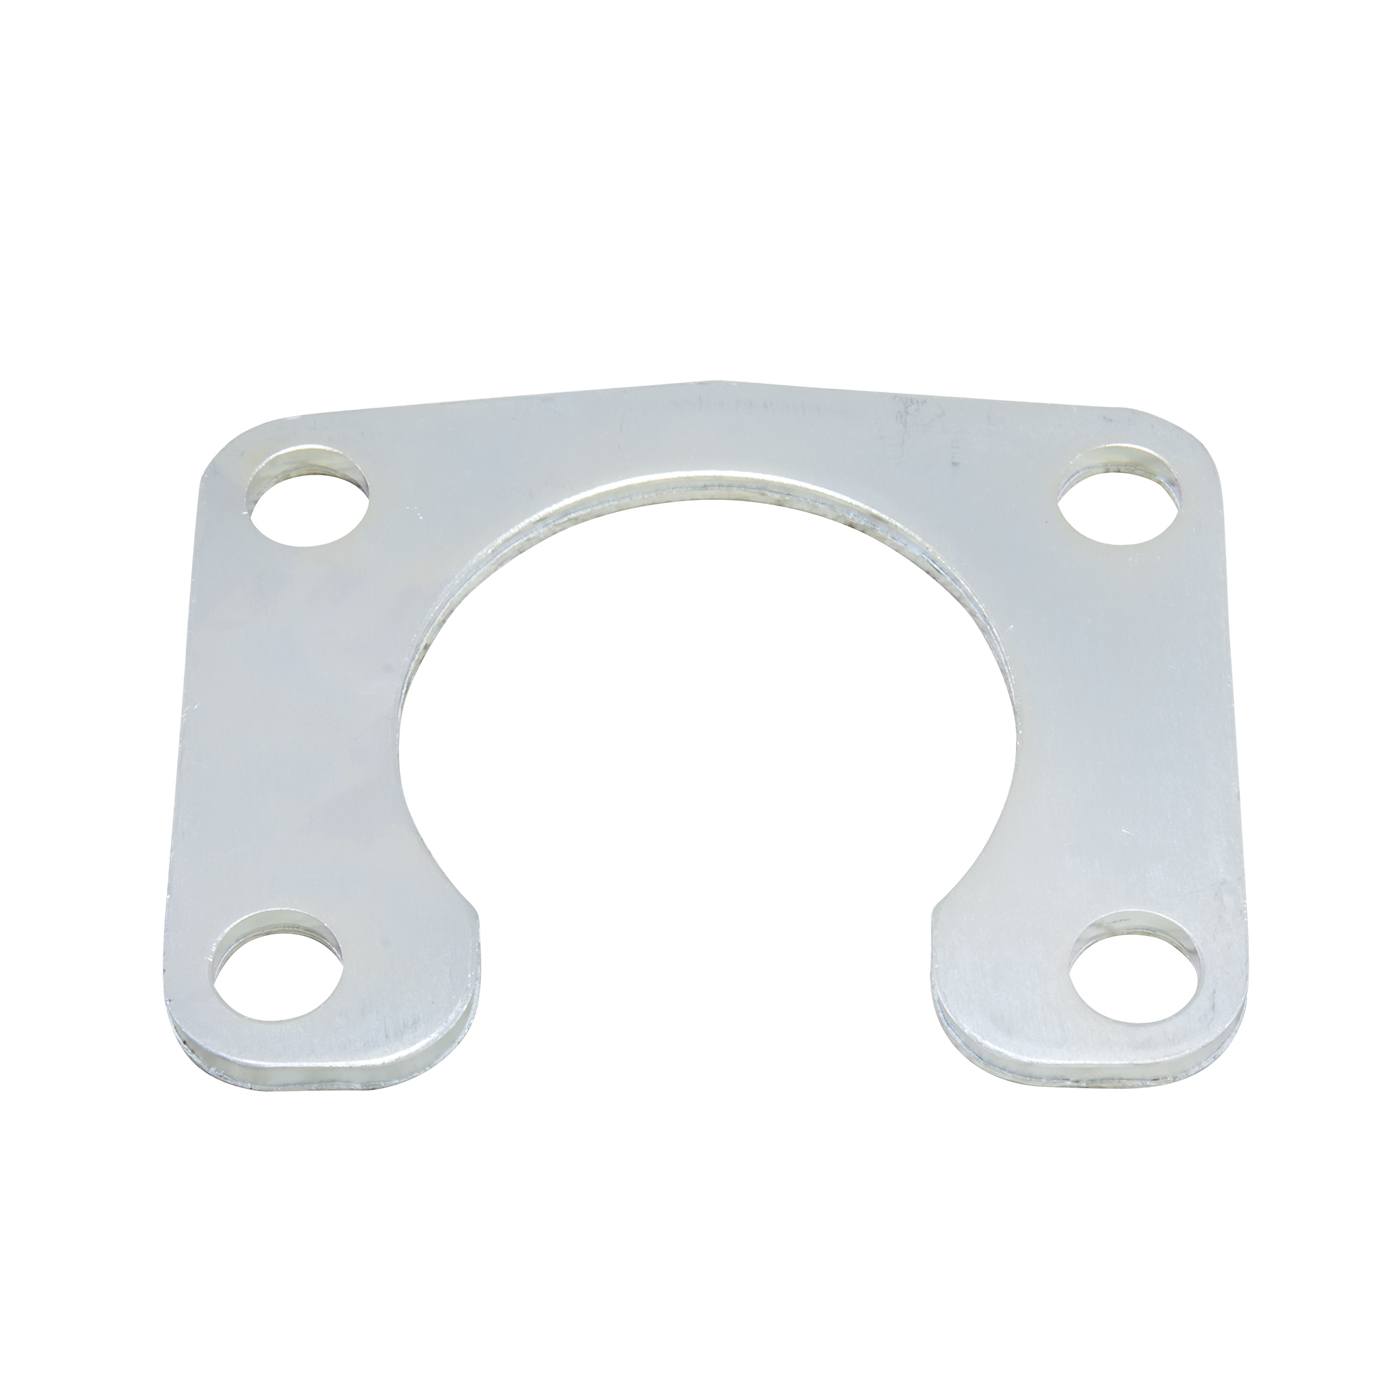 Axle bearing retainer for Ford 9", large bearing, 1/2" bolt holes 